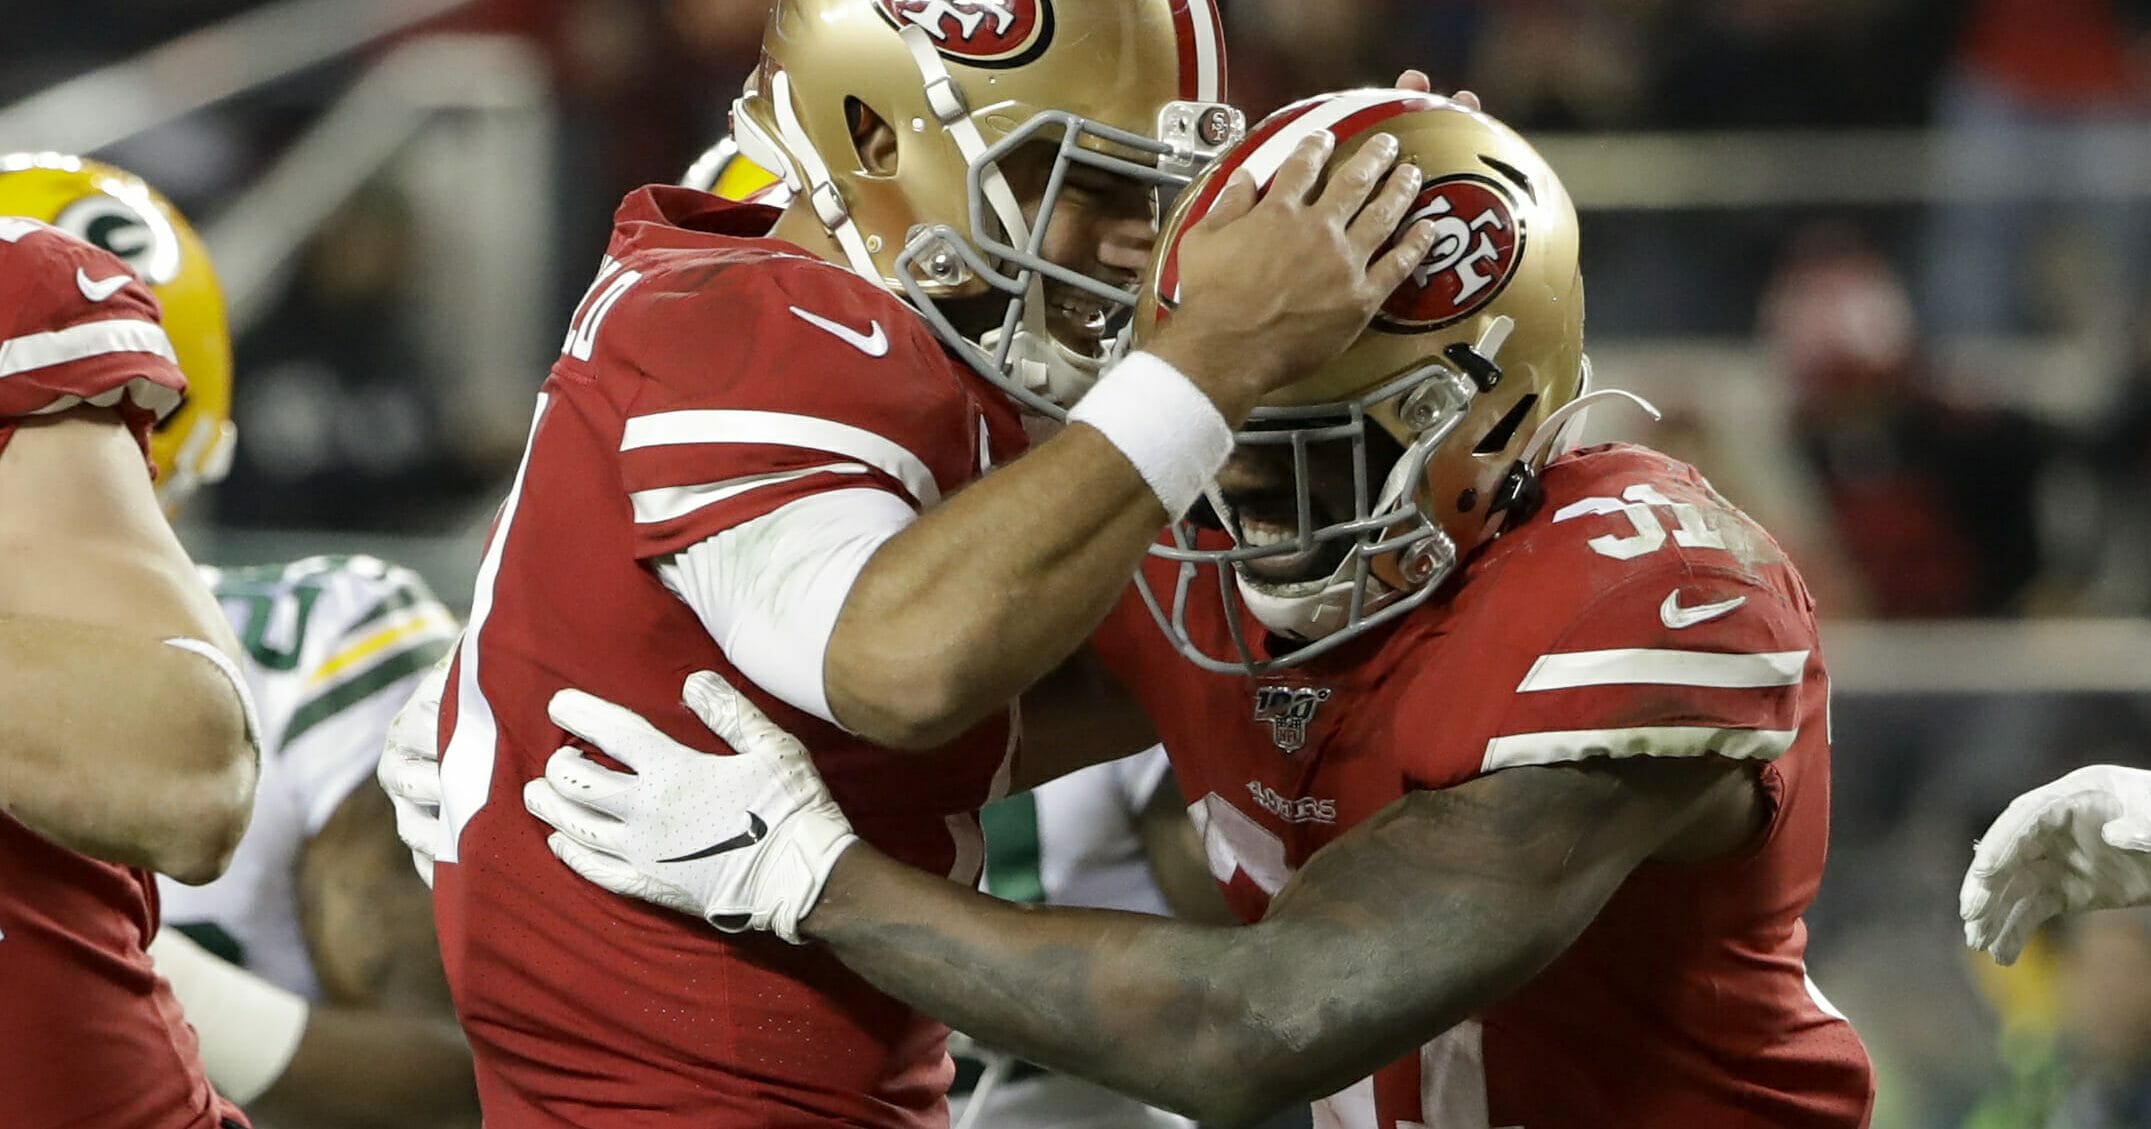 San Francisco 49ers running back Raheem Mostert, right, celebrates his touchdown with quarterback Jimmy Garoppolo during the NFC championship game against the Green Bay Packers on, Jan. 19, 2020, in Santa Clara, California.